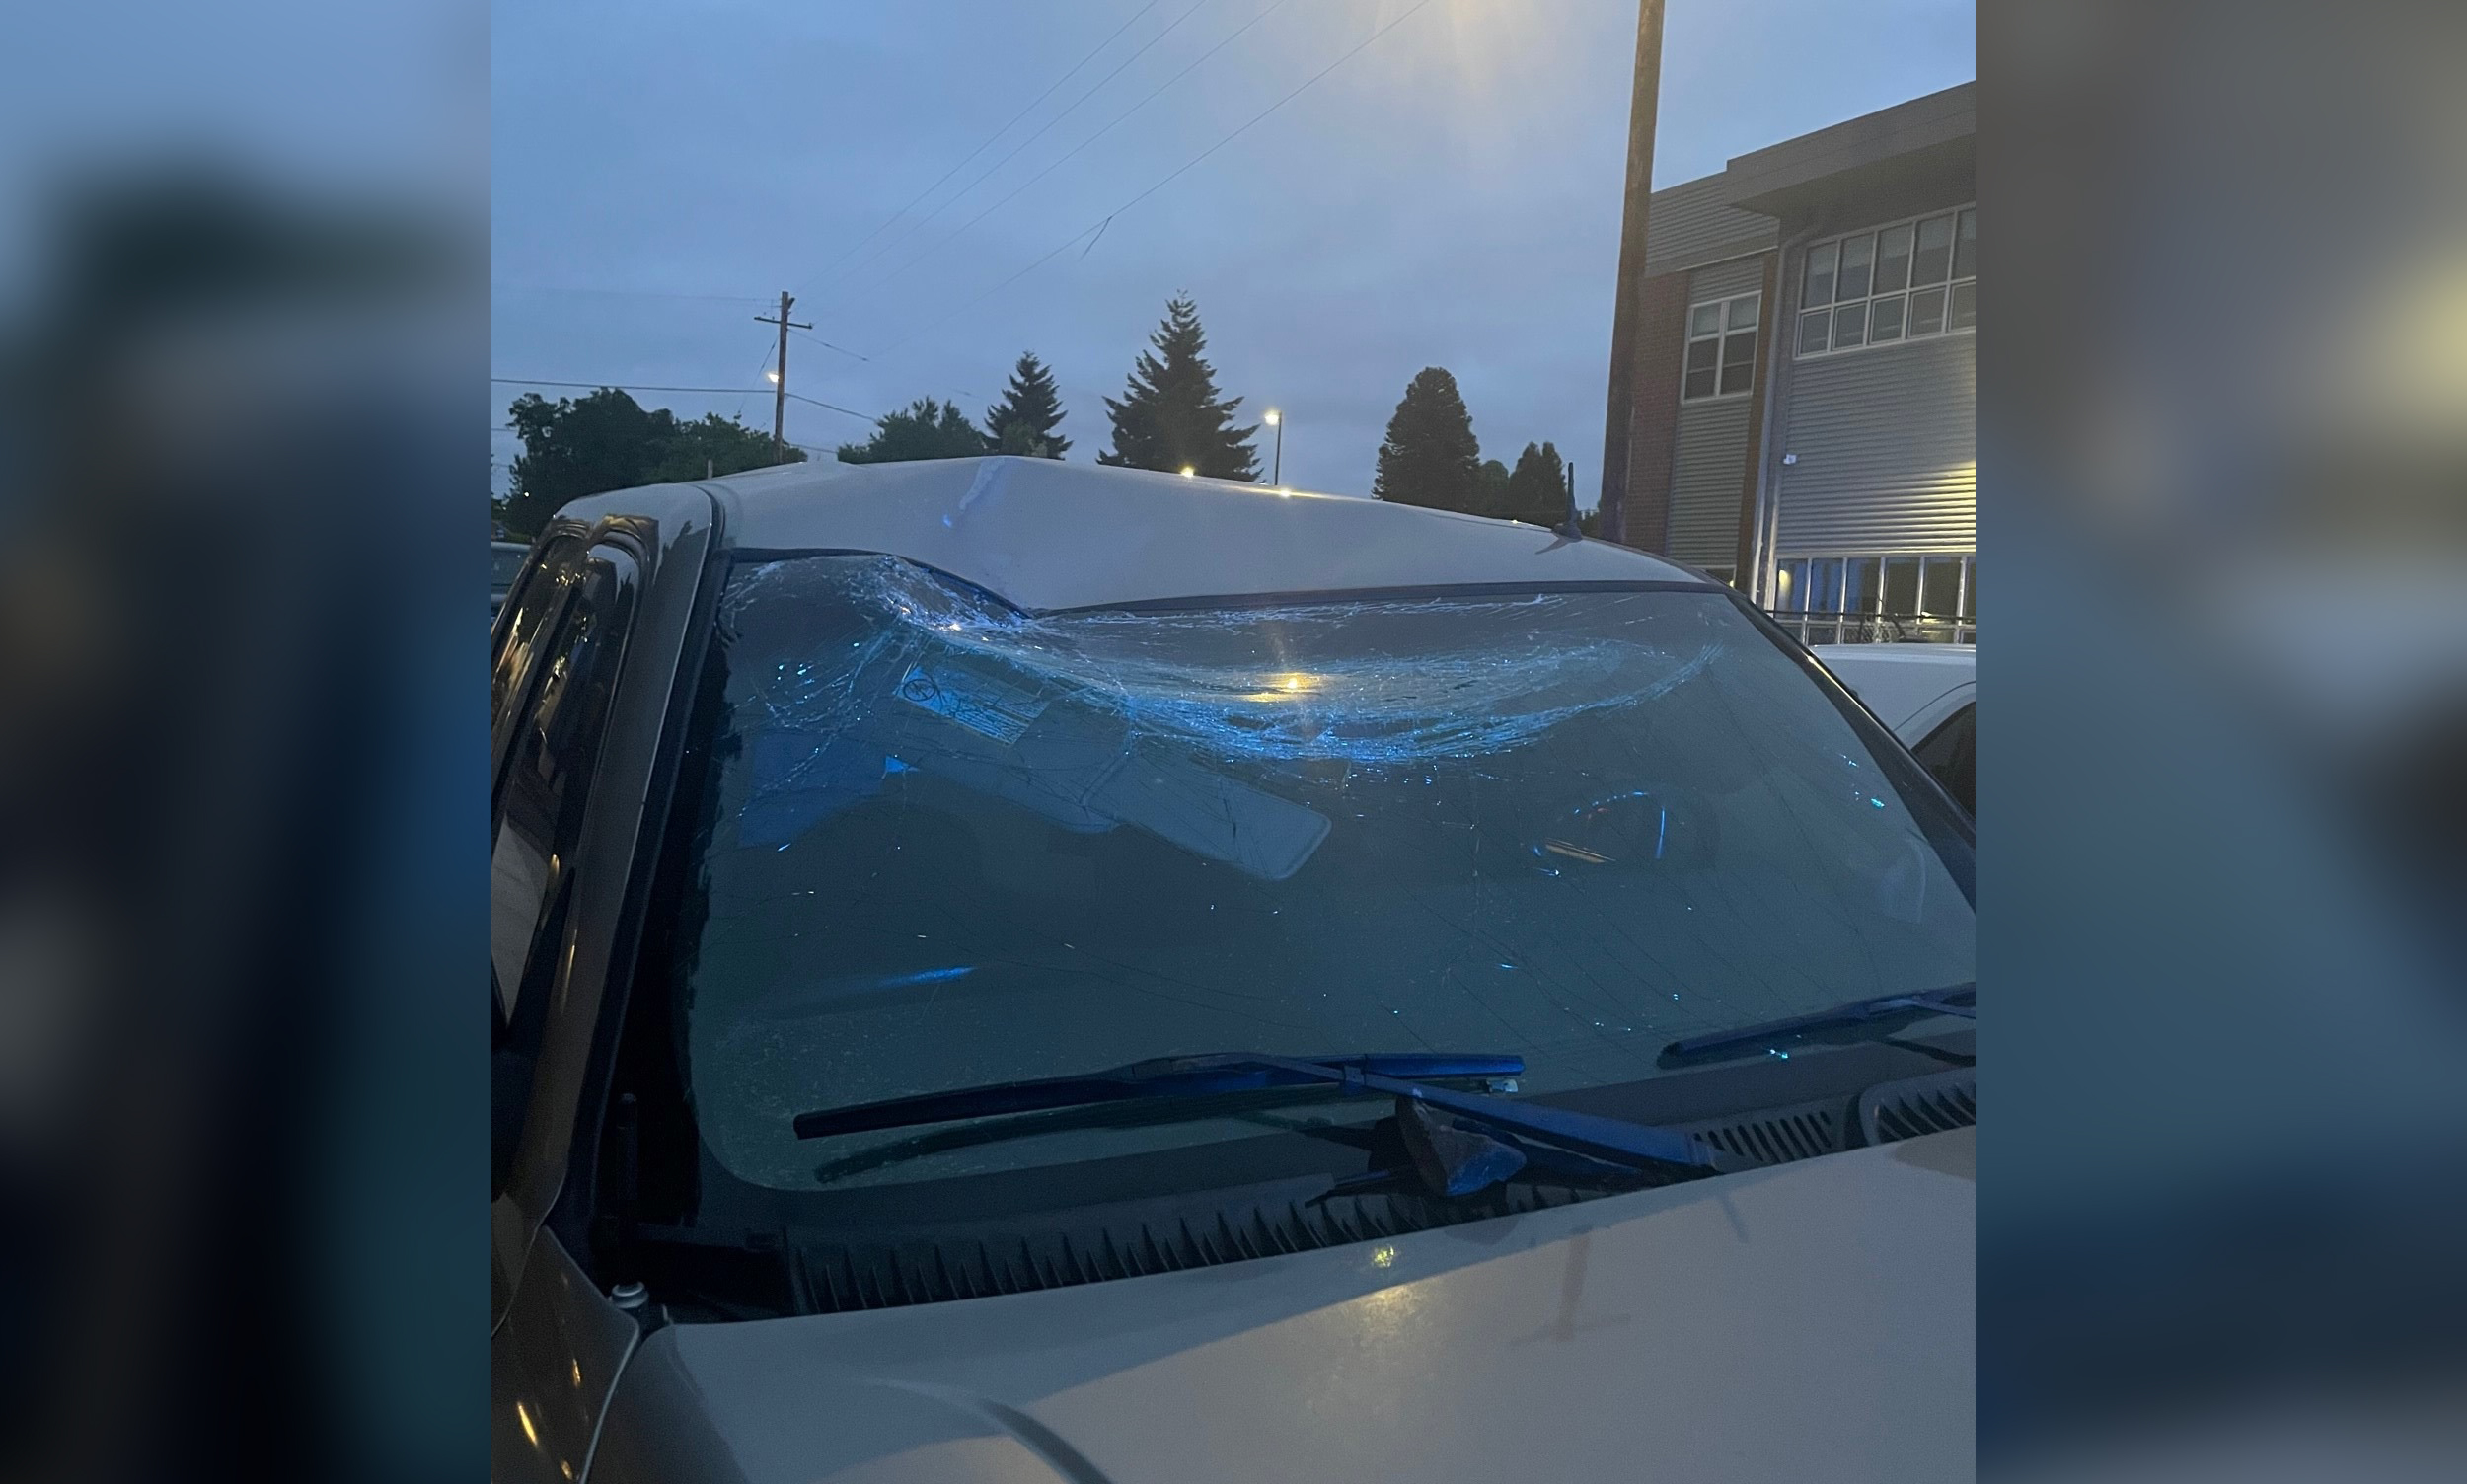 PHOTO: Multiple cars traveling on NE 223rd Avenue and I-84 in Fairview were struck by thrown rocks according to the Multnomah County Sheriff's Office in Portland, Ore.